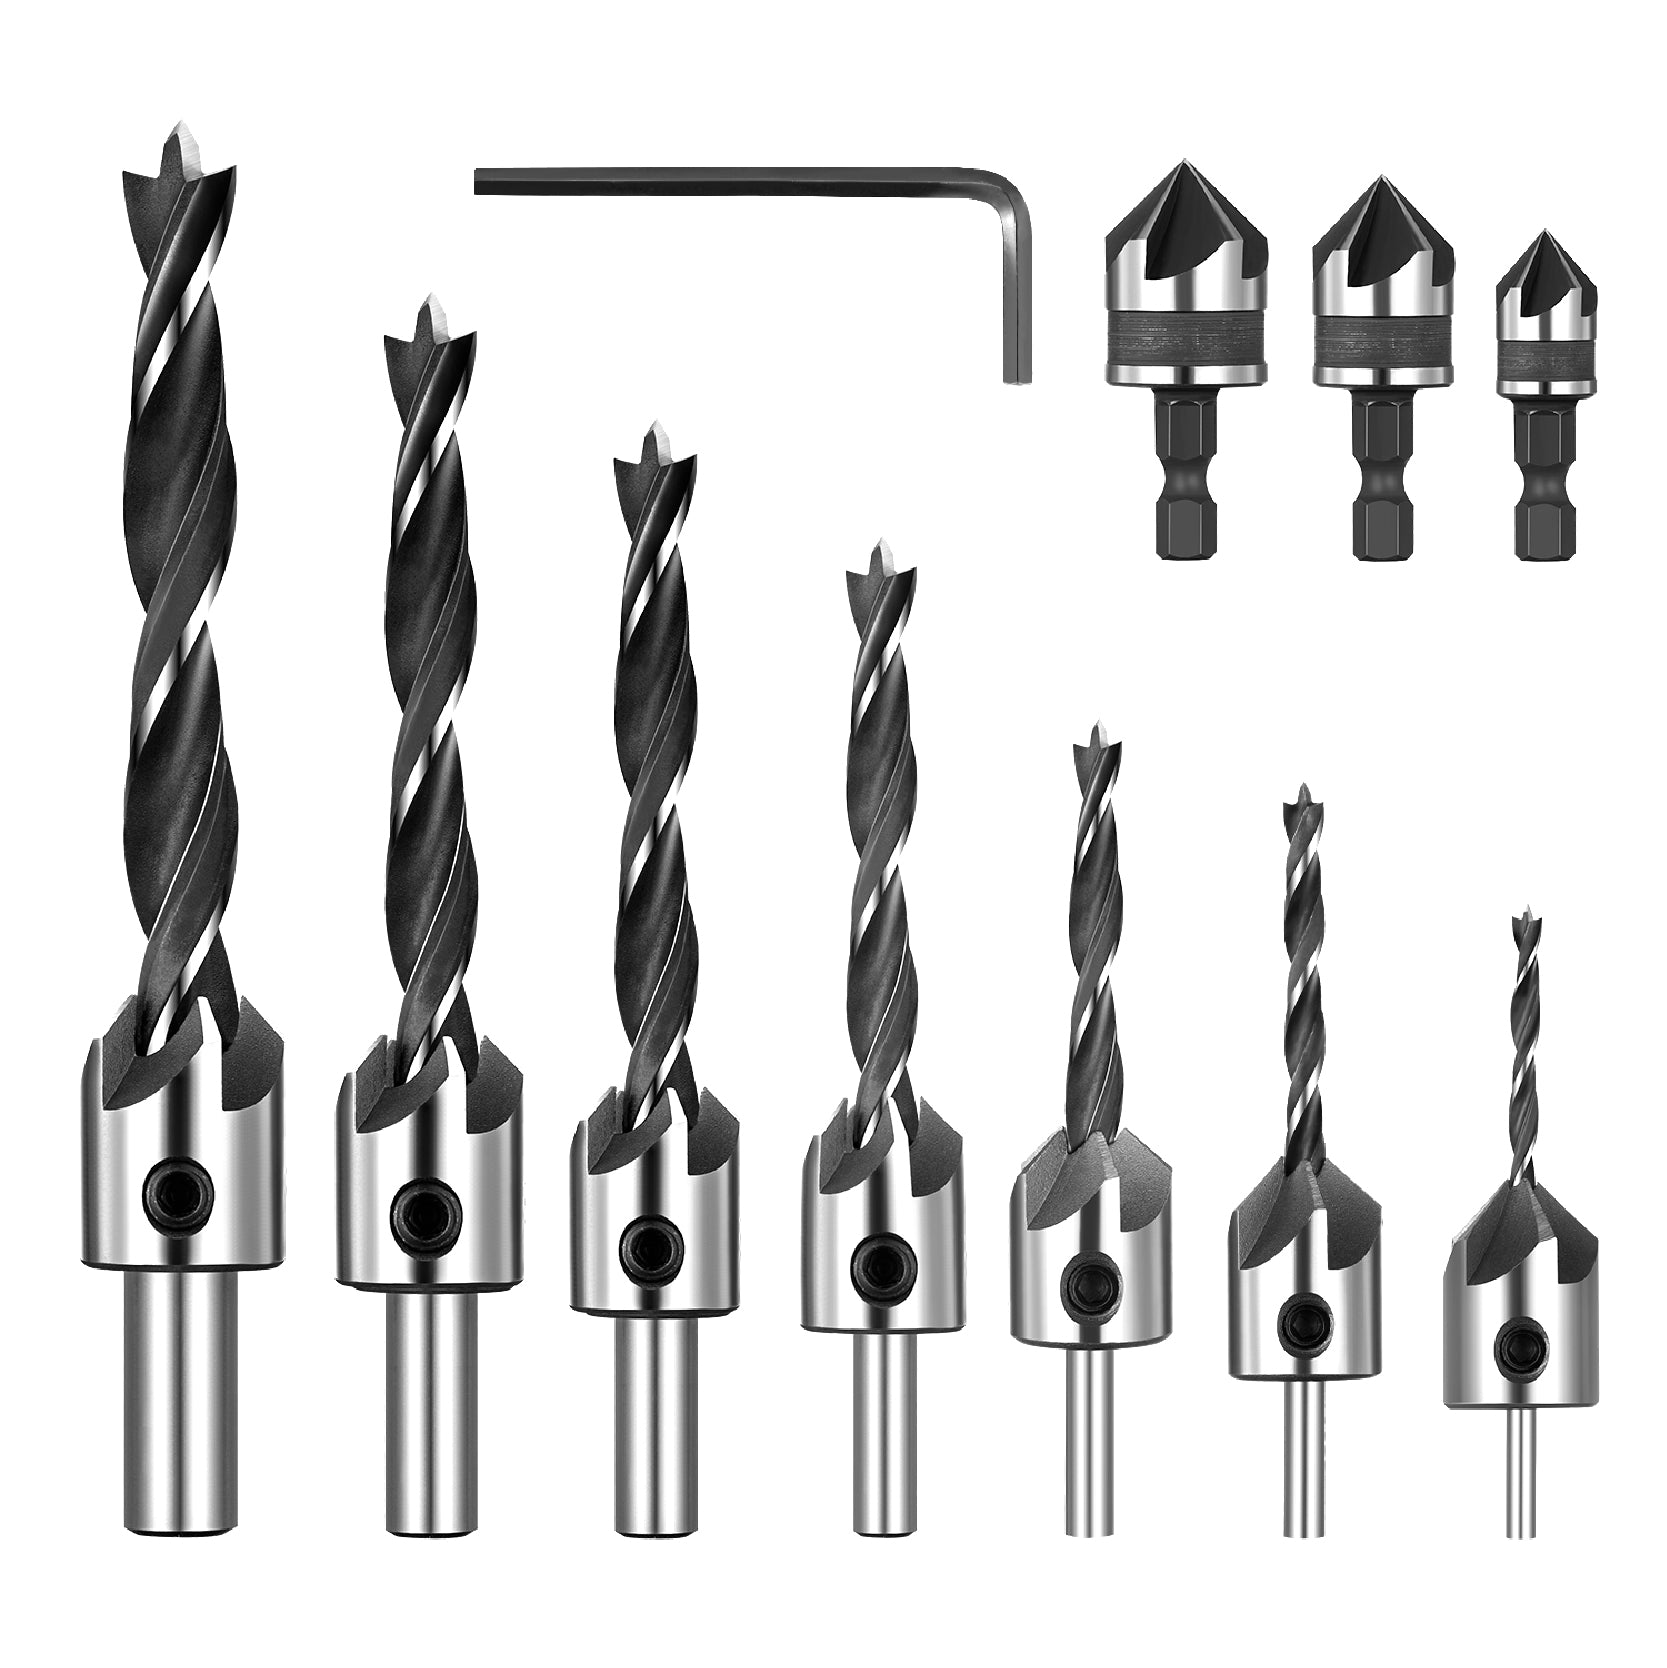 Amoolo 10-Pack Countersink Drill Bit Set with 1 Free Hex Key Wrench, 7 Pcs Countersink Drill Bits for Wood, 3 Pcs Hex Shank Wood Countersink Bits